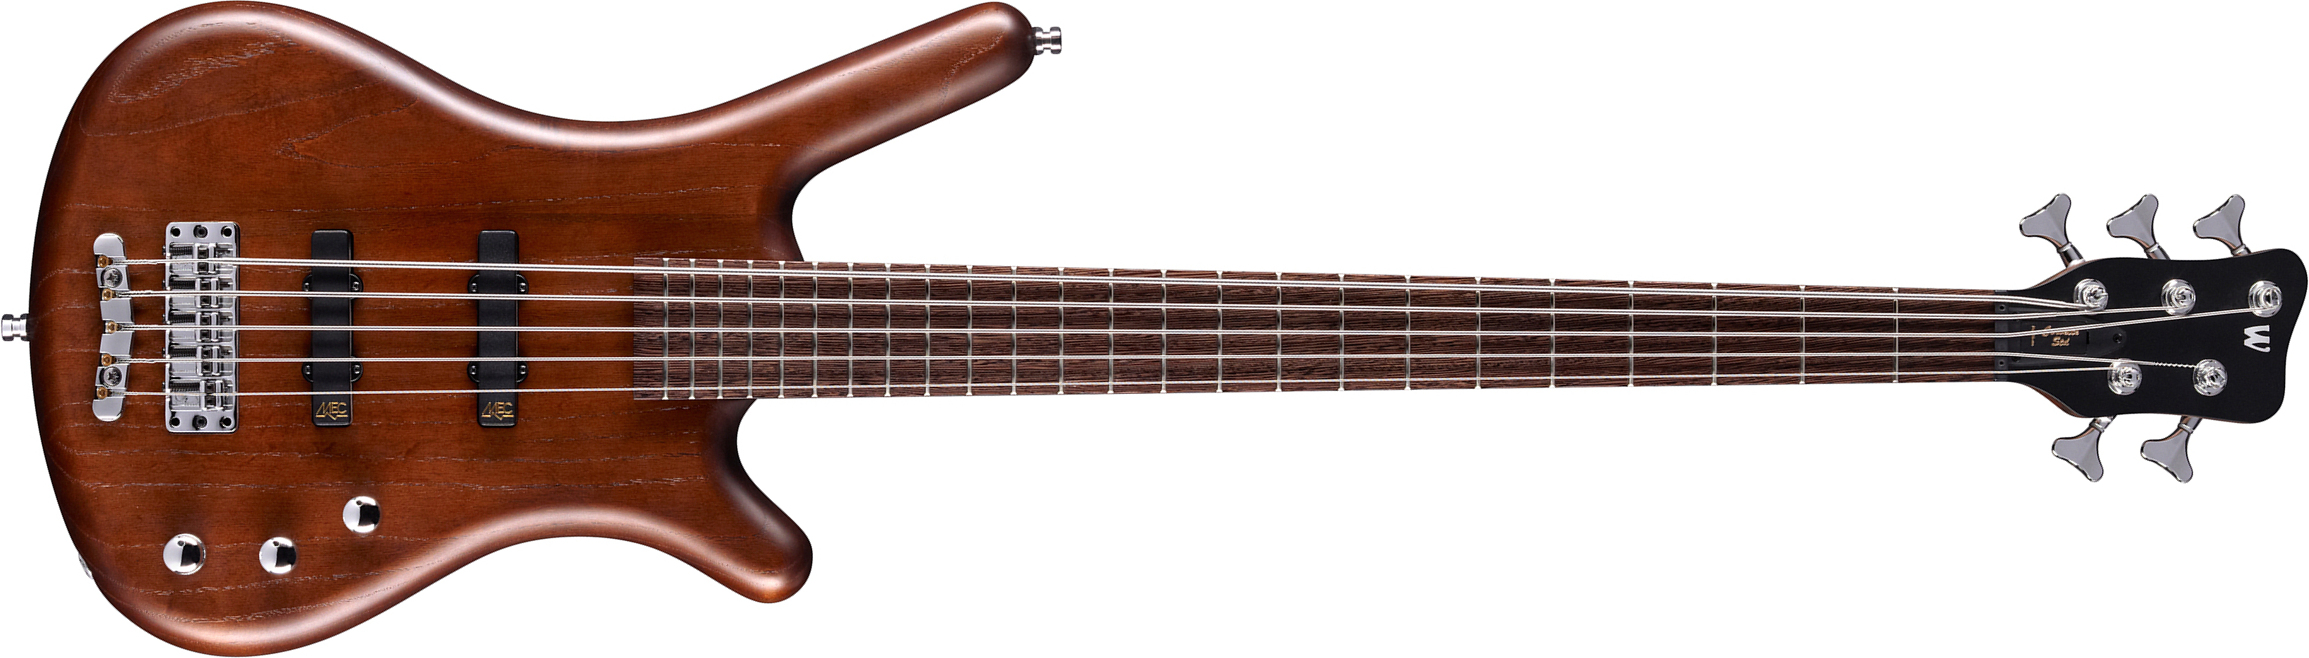 Warwick Corvette Ash 5-string Pro Gps All Active 5c Wen - Antique Tobacco Satin - Solid body electric bass - Main picture